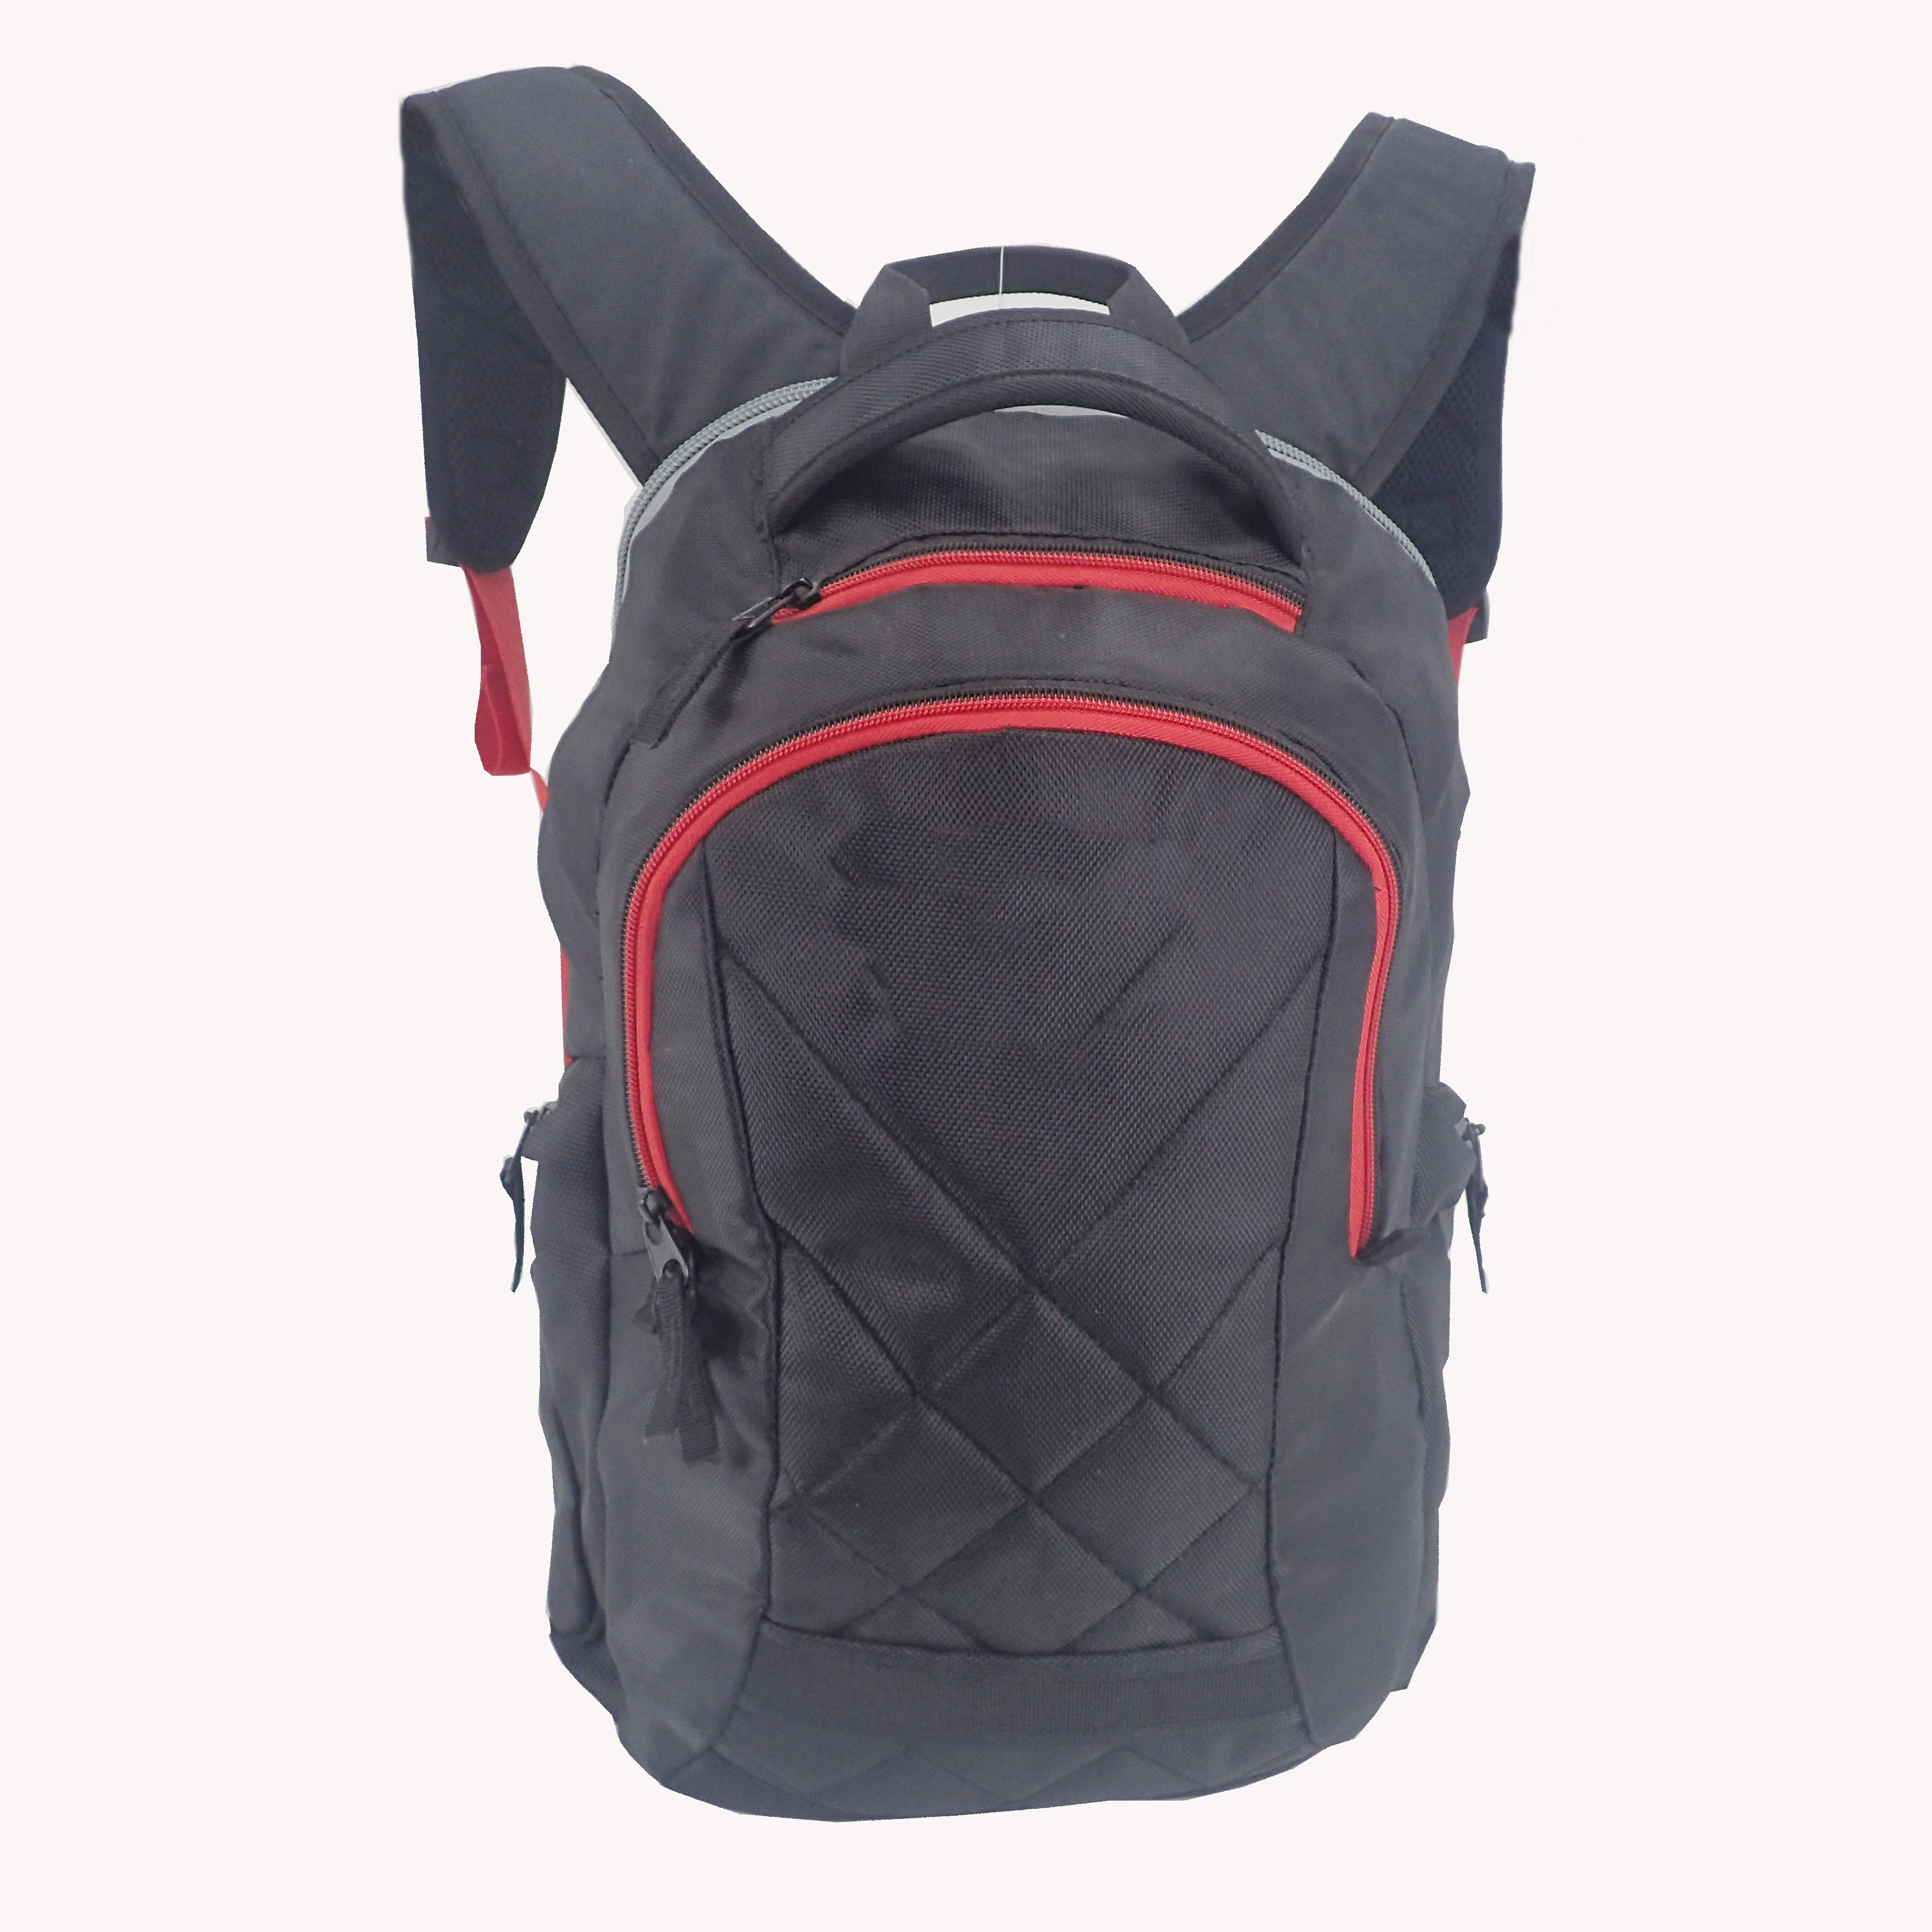 Compuer backpack